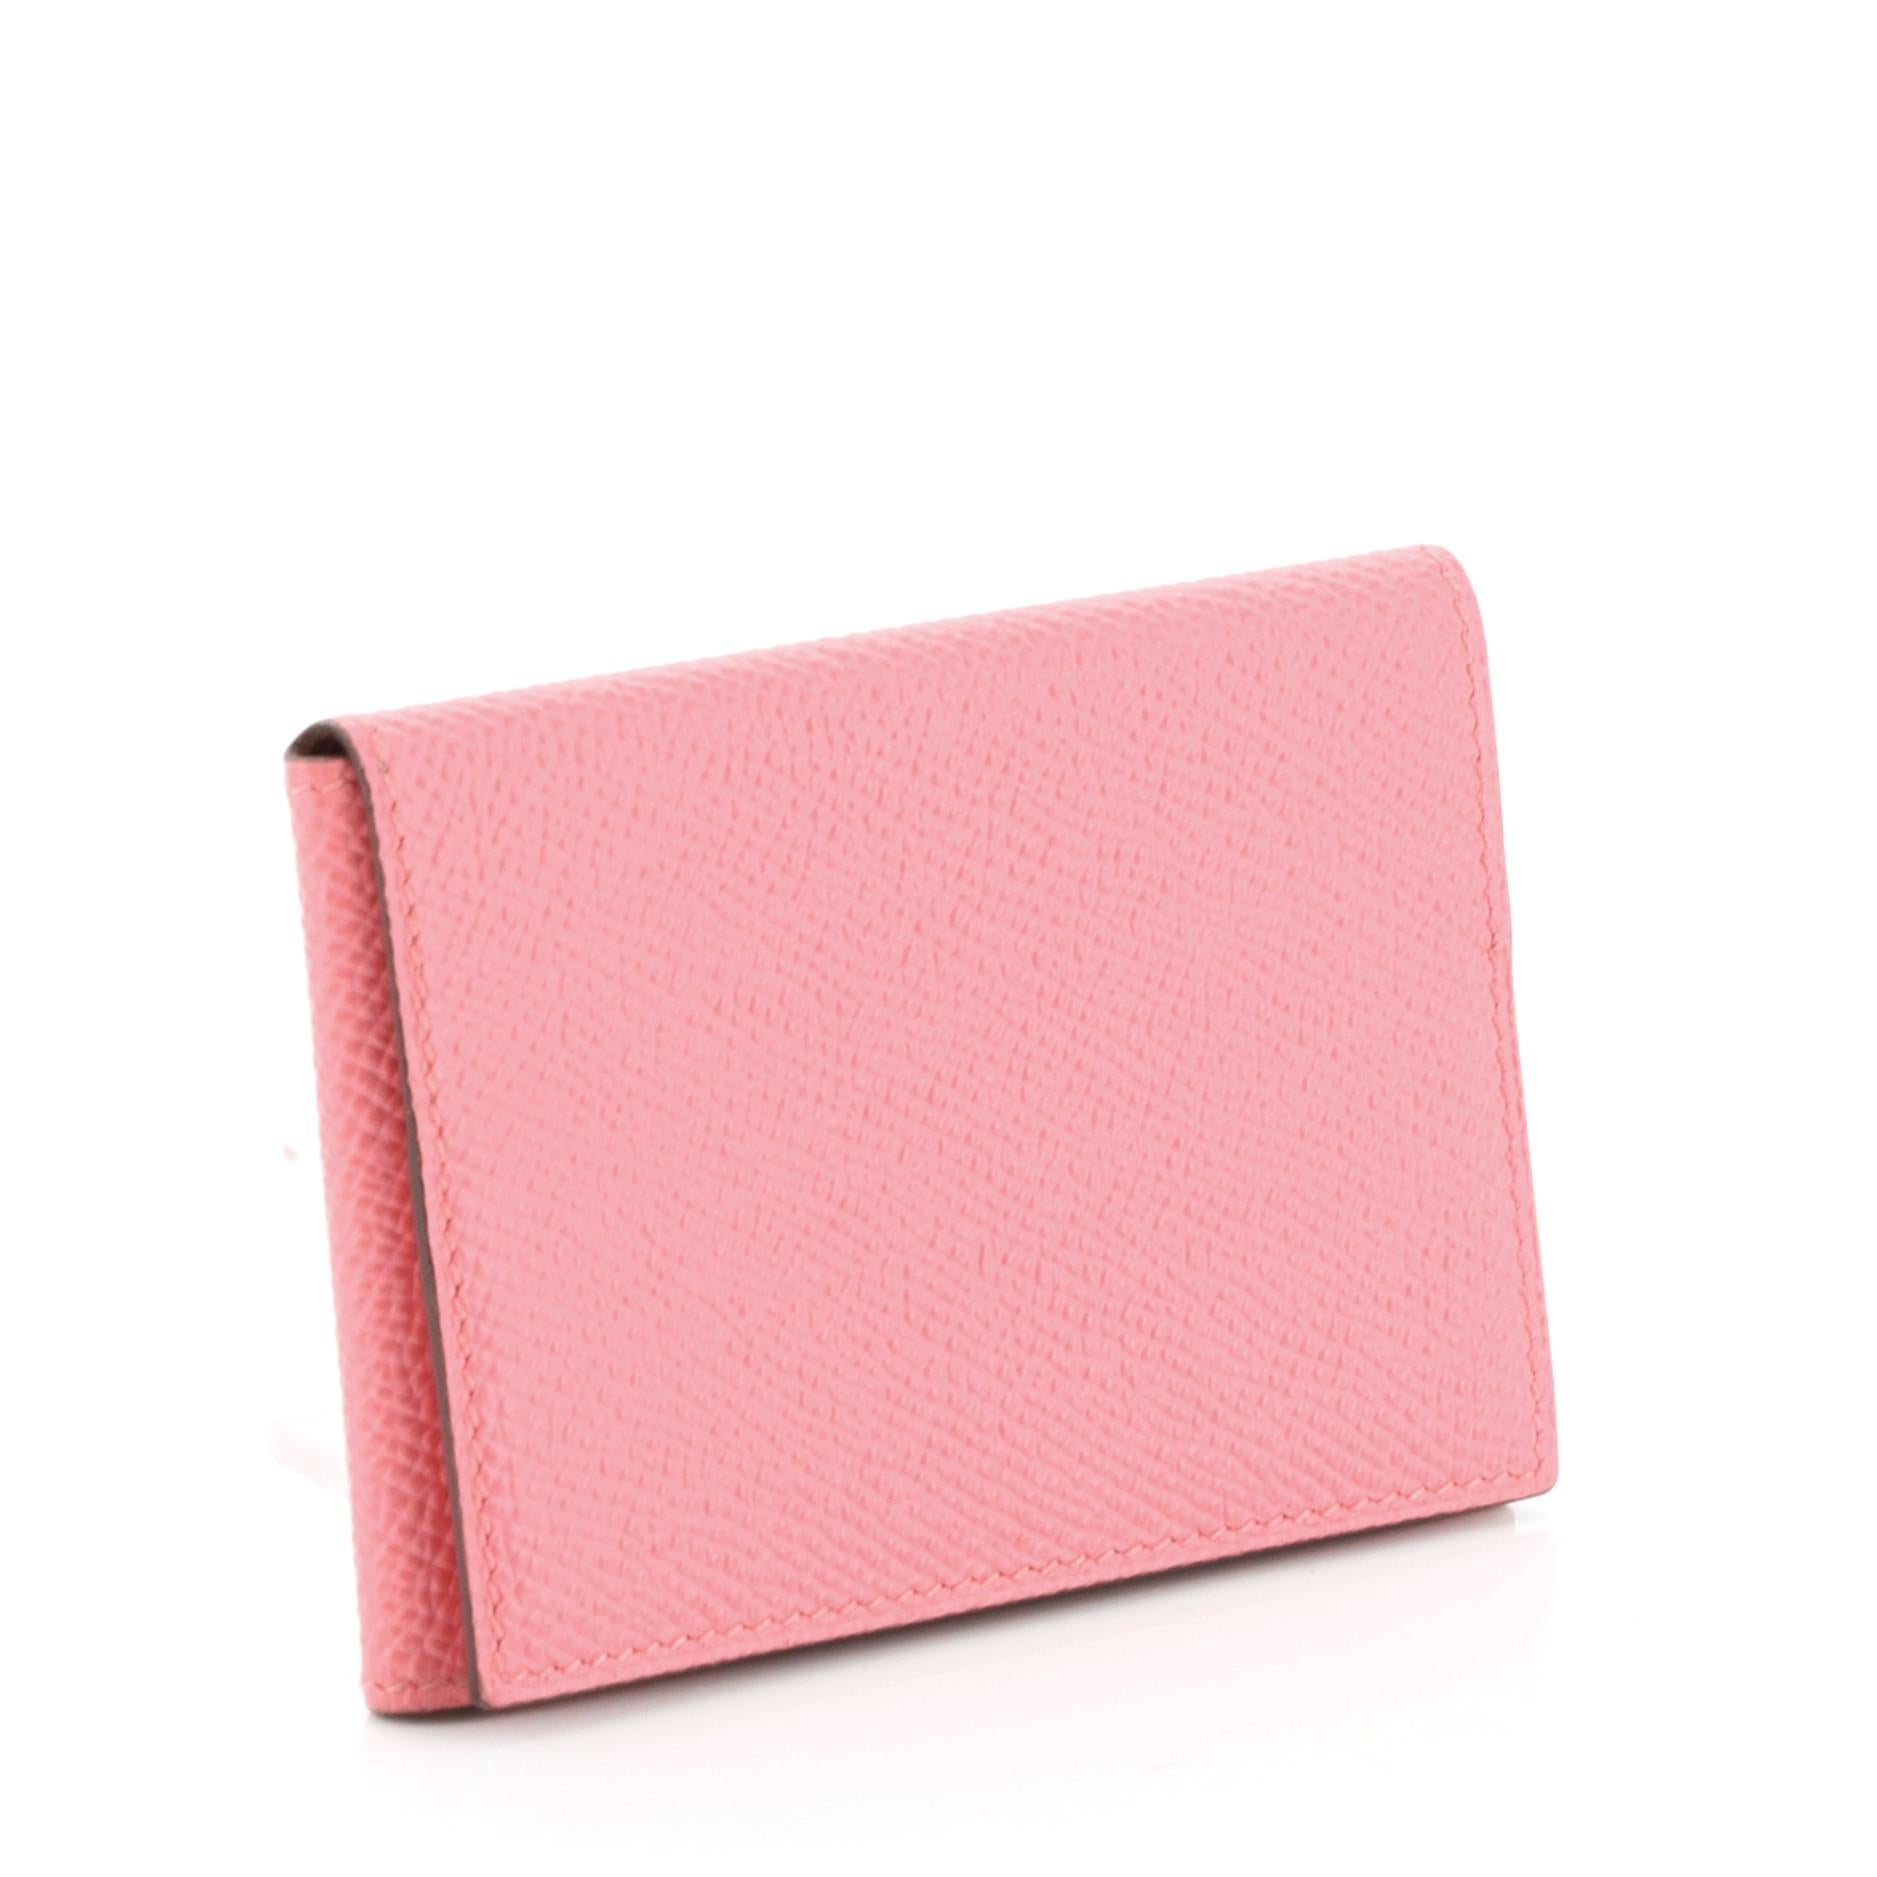 This Hermes Guernesey 3CC Card Holder Epsom, crafted from pink Epsom leather. It opens to a pink leather interior with three card slots. Date code reads: T (2015). 

Estimated Retail Price: $560
Condition: Excellent. Light wear on base wax